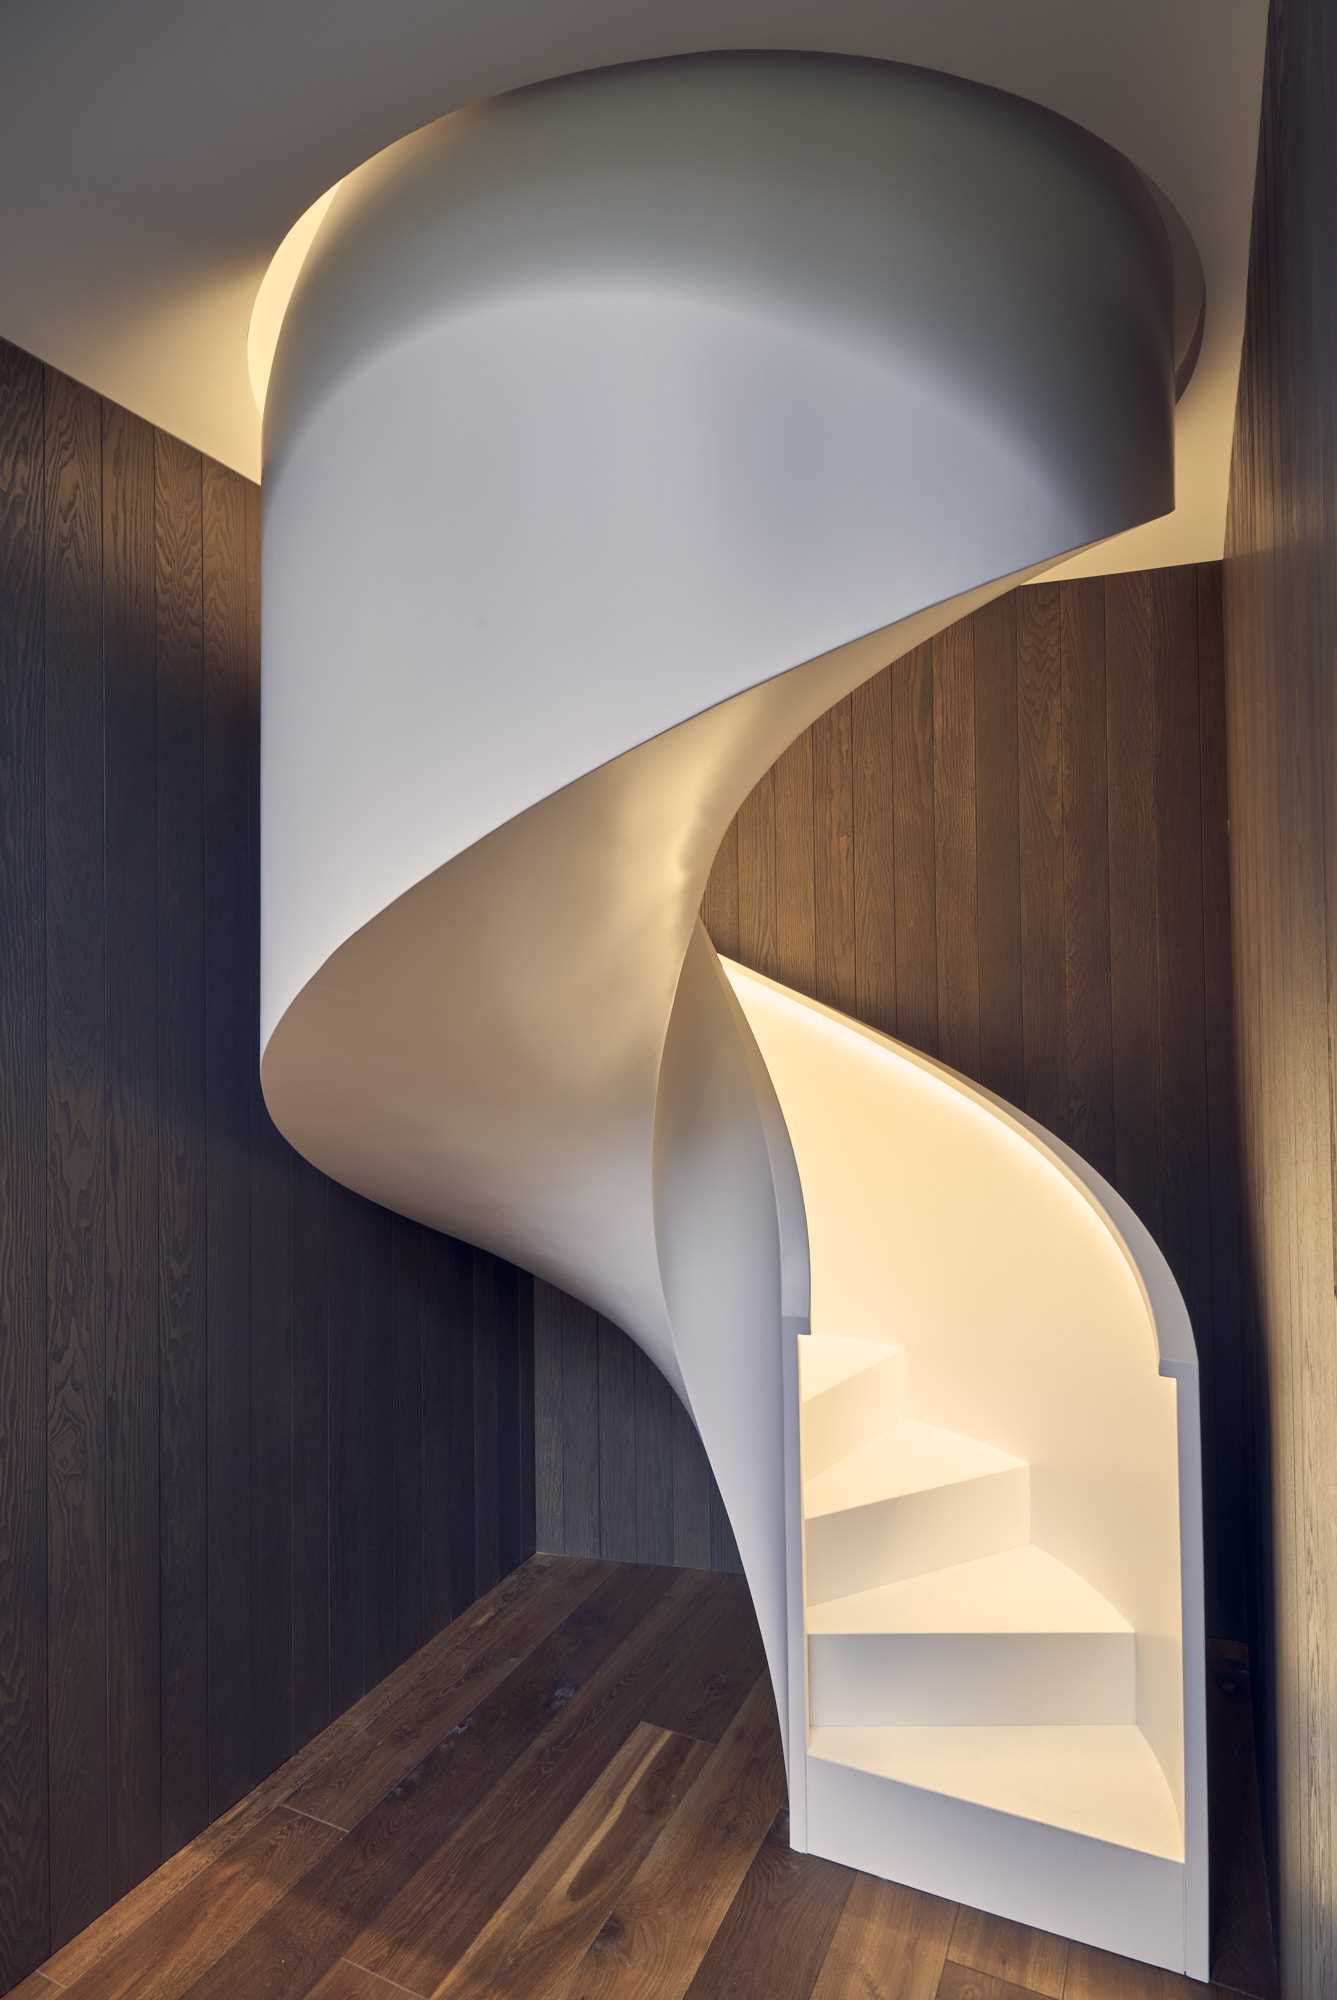 Sculptural white spiral staircase with hidden lighting.